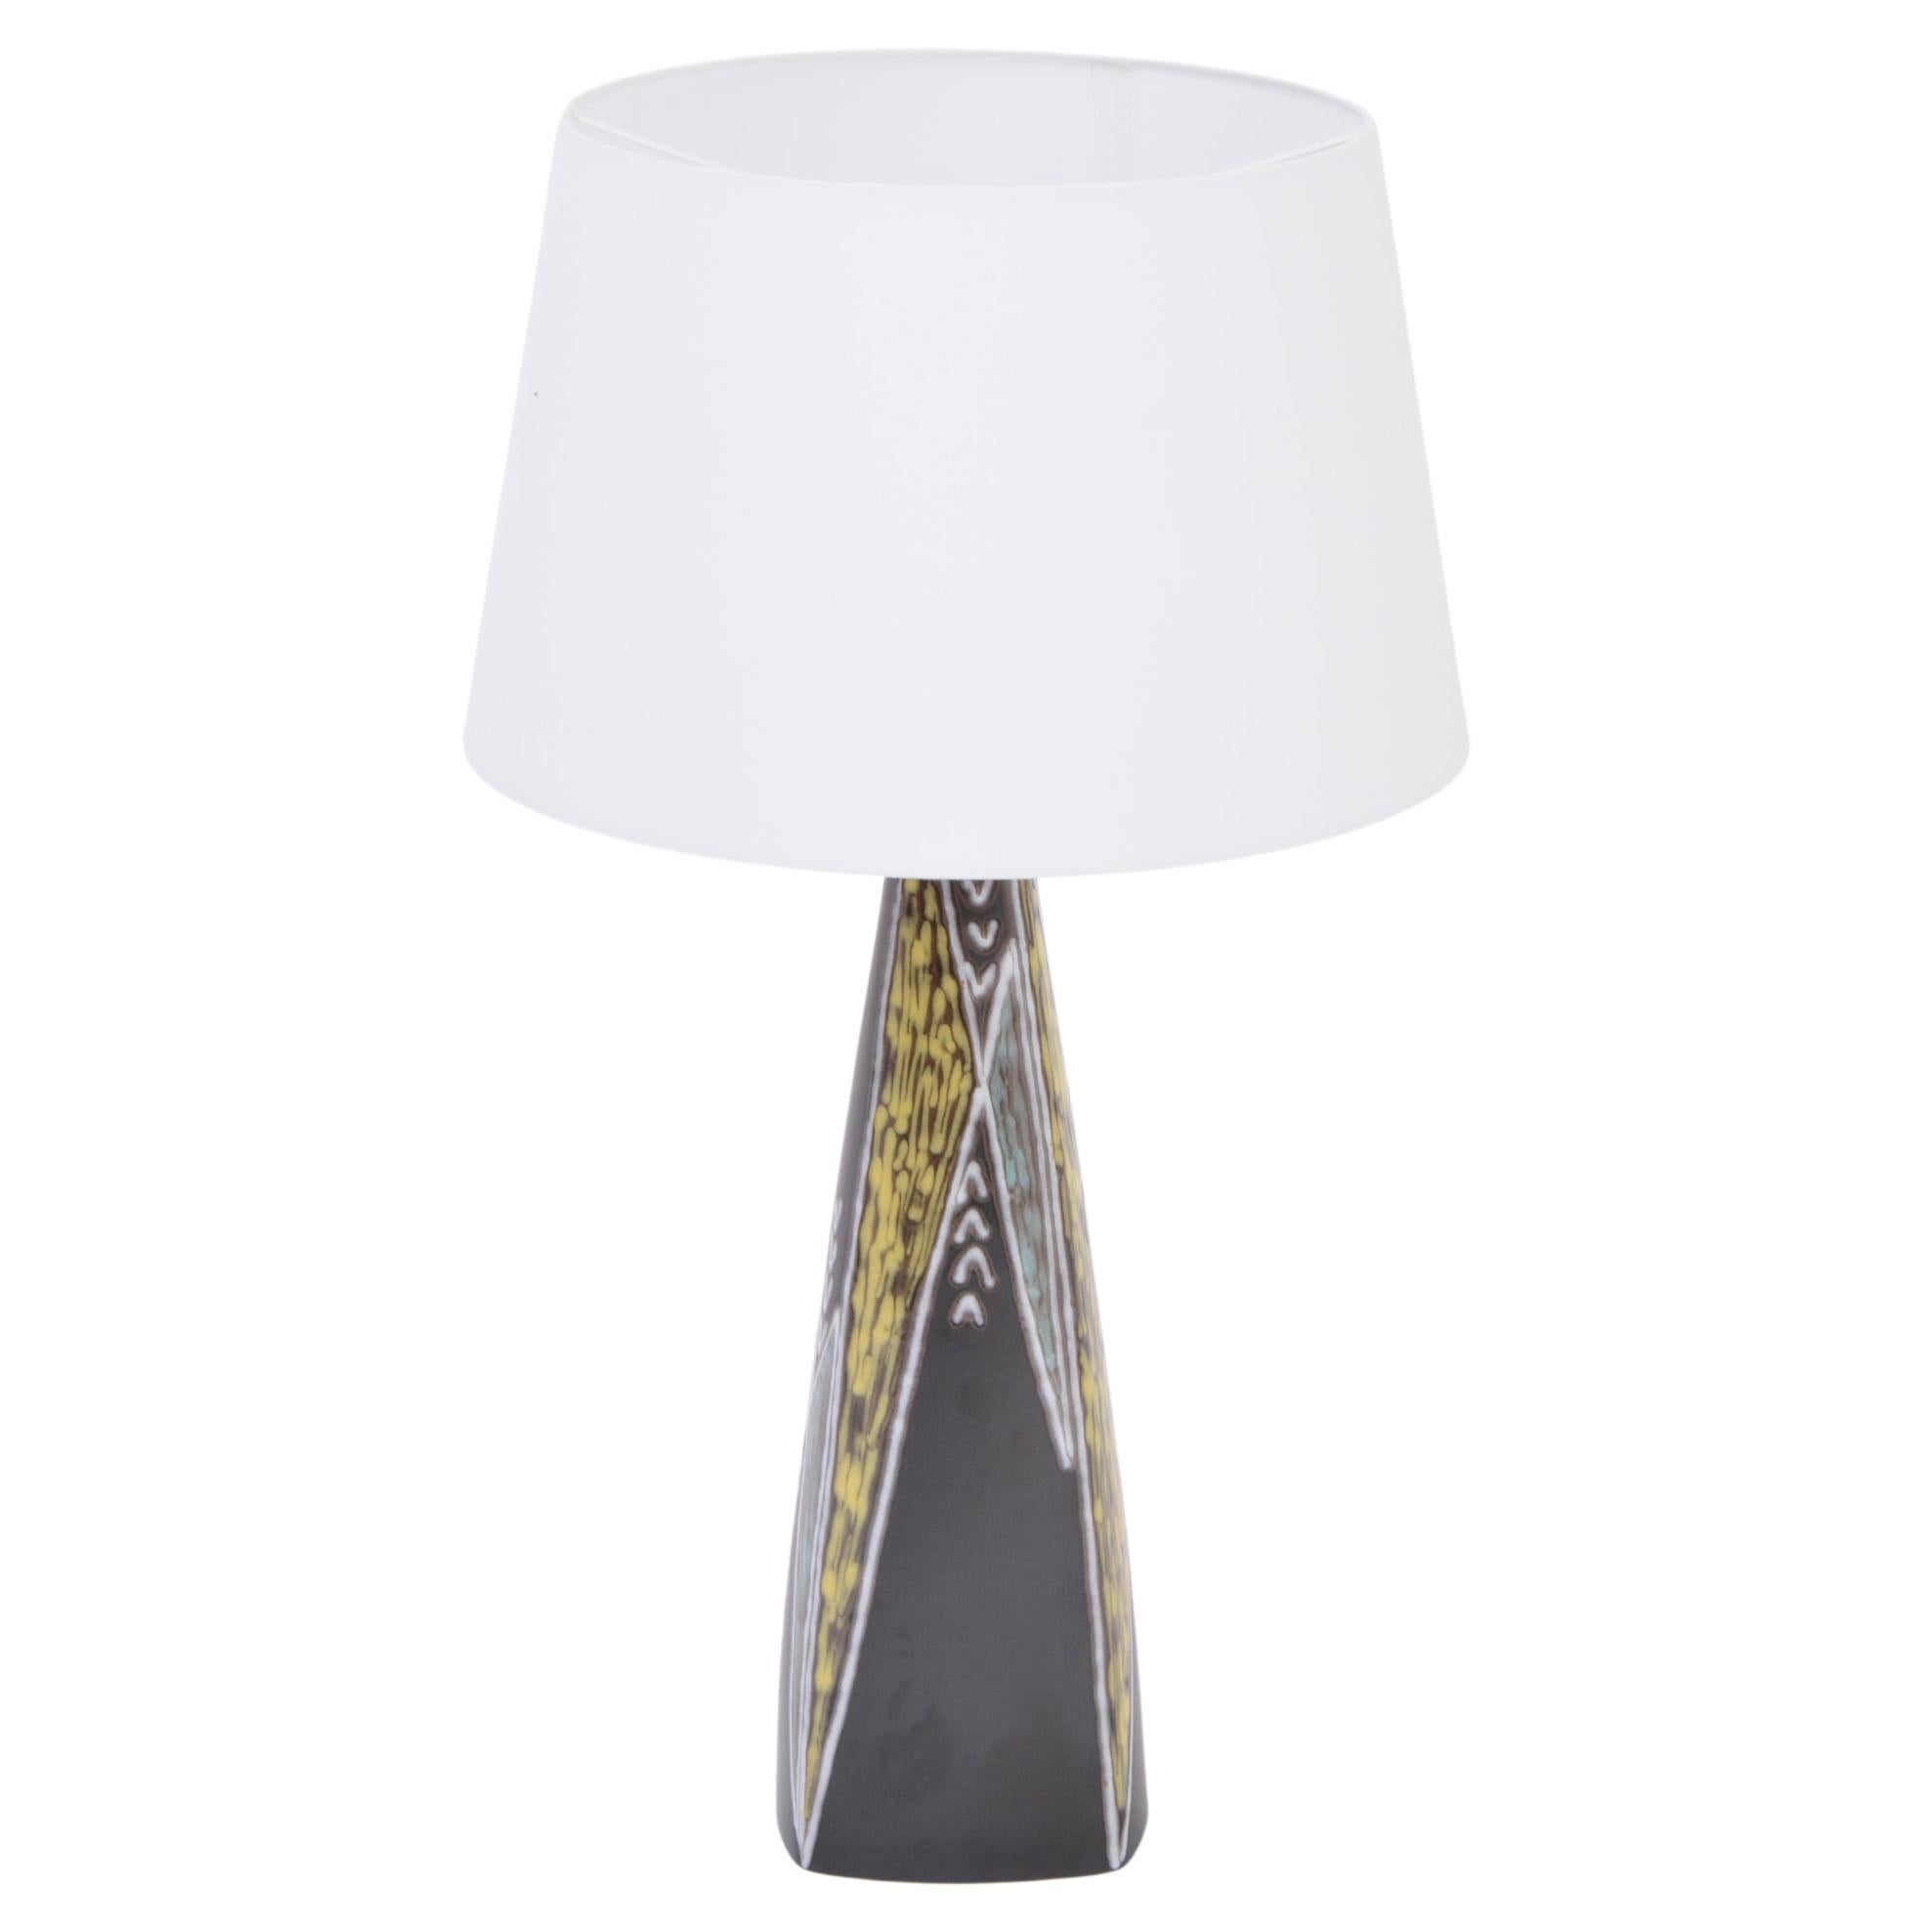 Tall Black Danish Midcentury Ceramic Table Lamp by Holm Sorensen for Søholm For Sale